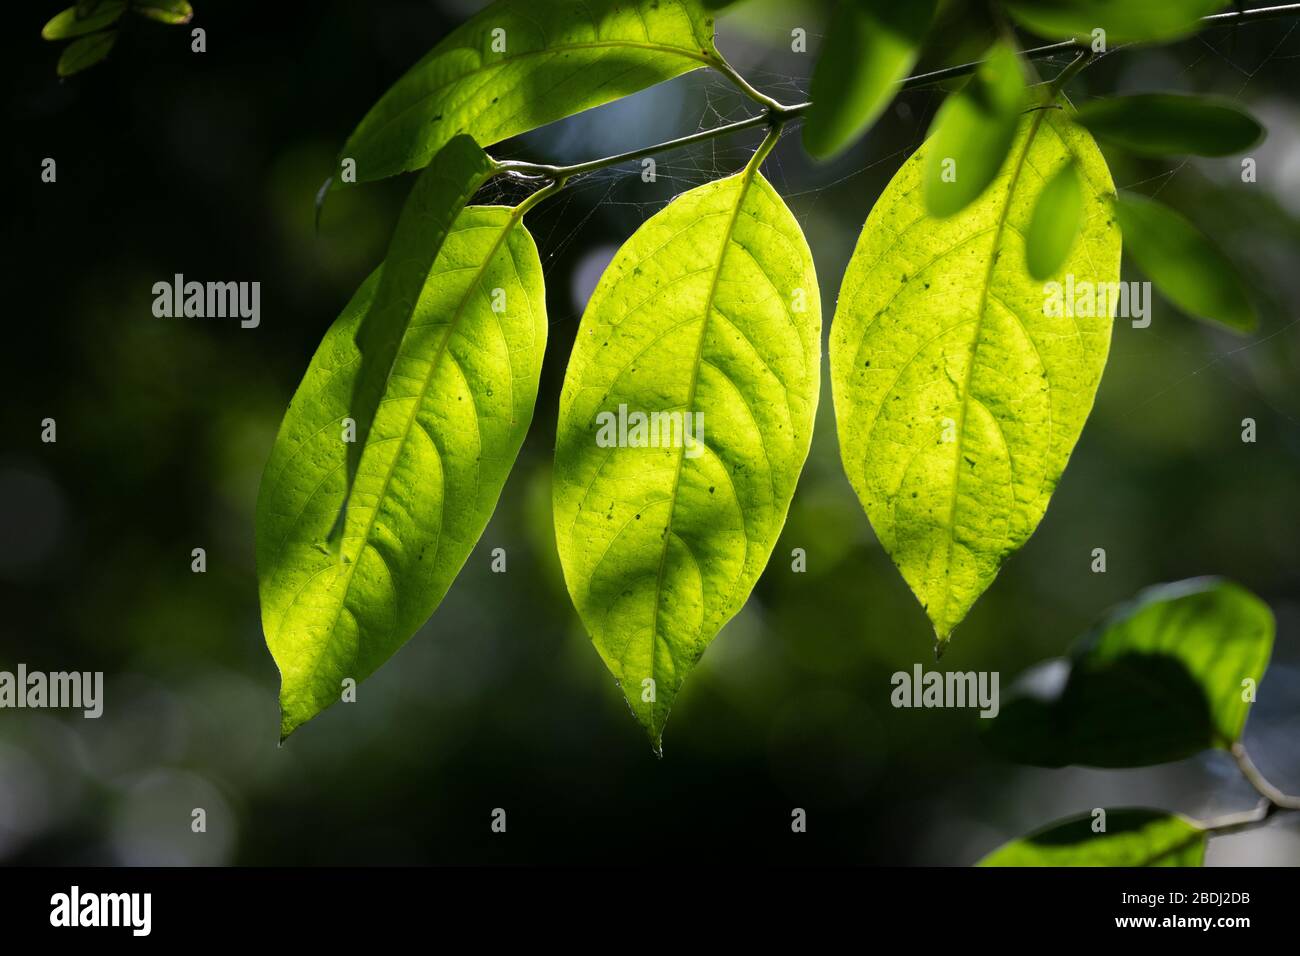 Leaves growing on the Ayahuasca vine which is traditionally used in South America as hallucinogenic aid to spiritual or shamanistic practices Stock Photo